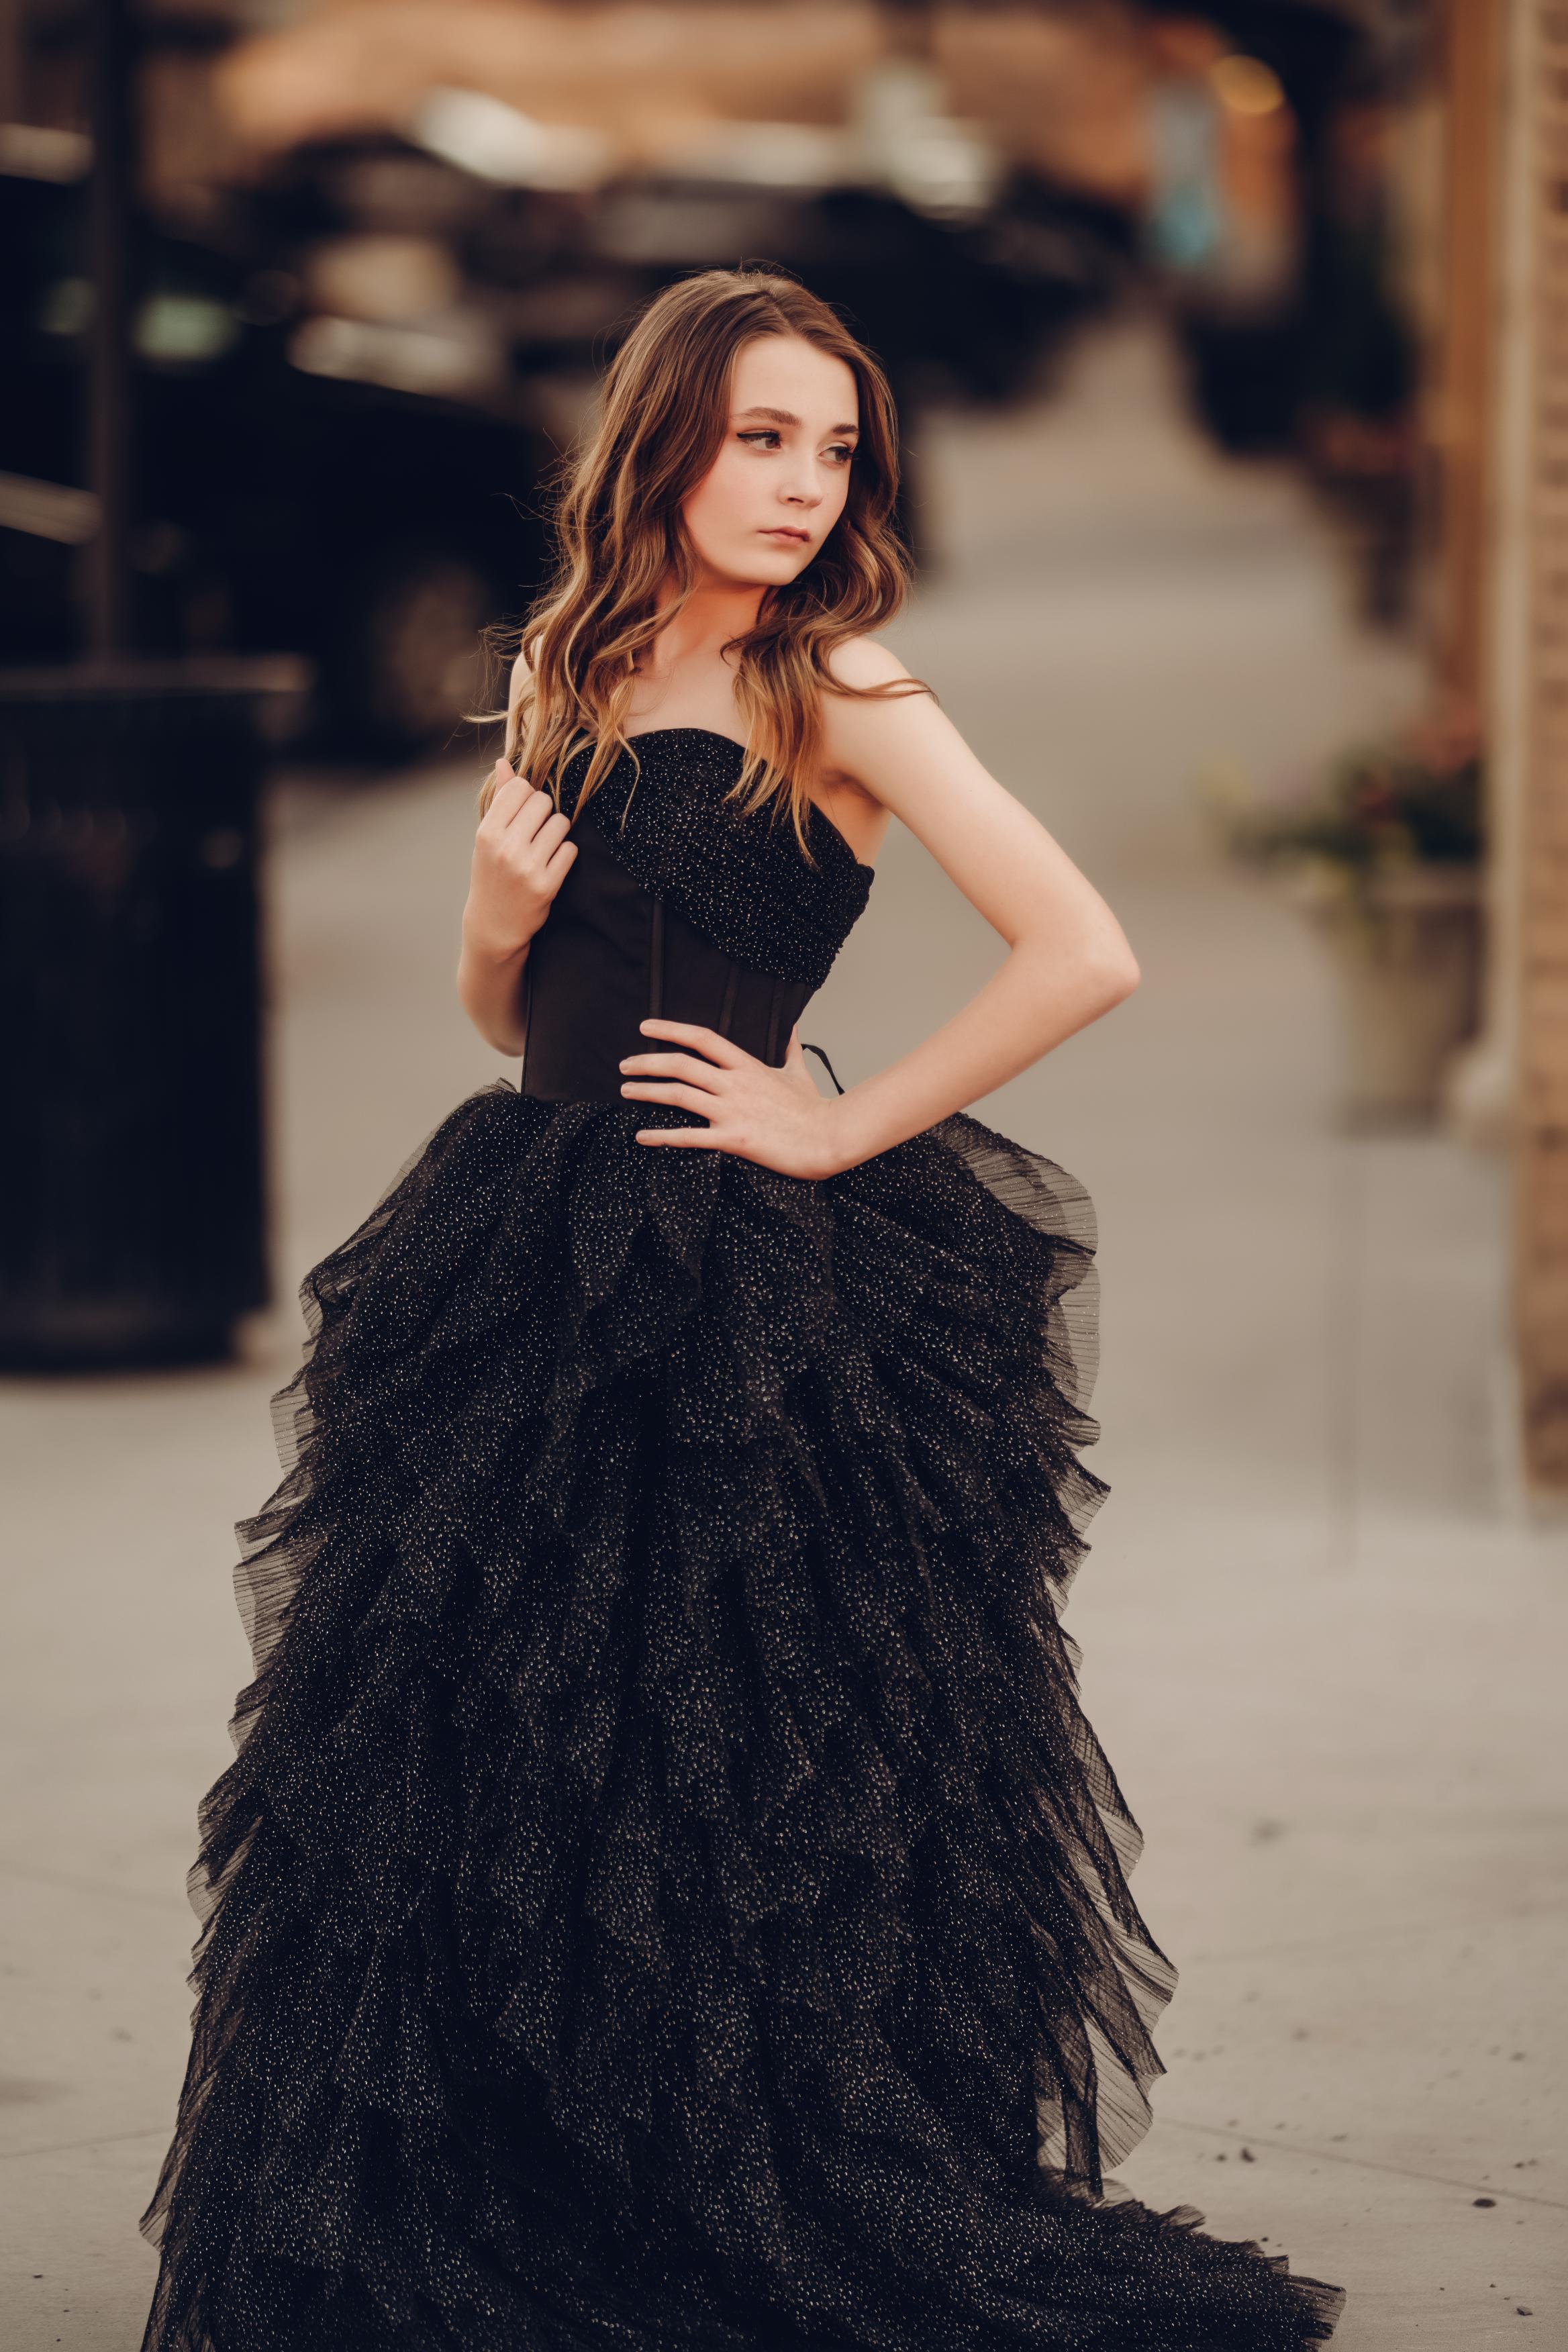 beautiful black dress for photography sessions